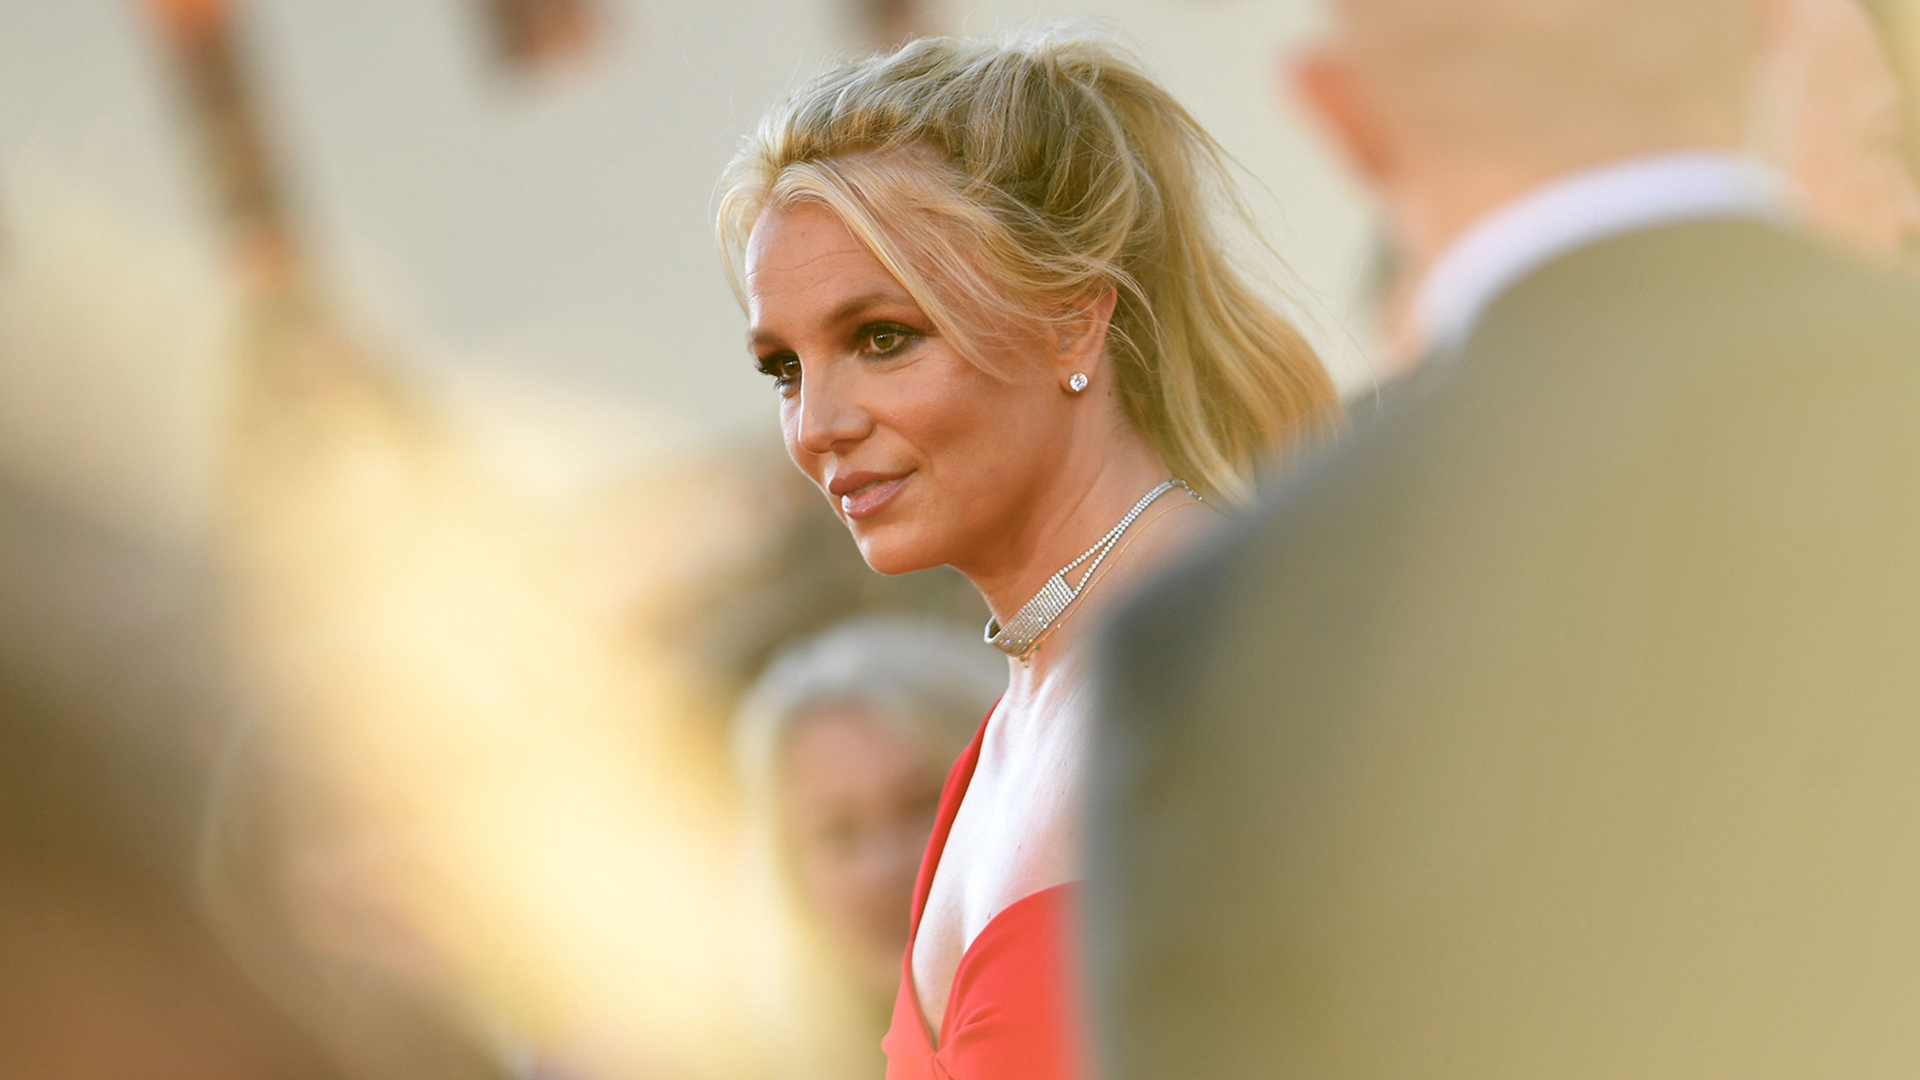 Here are some of the biggest bombshells in Britney Spears' memoir